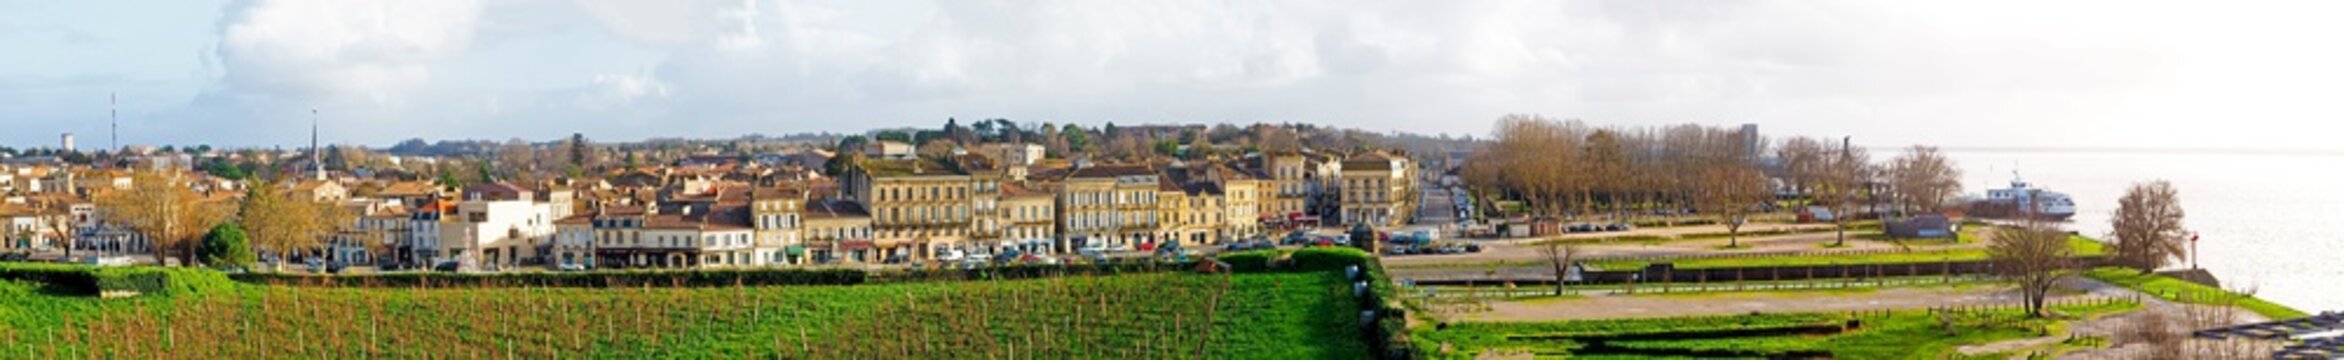 superb panoramic view of the town and port of Blaye, famous for its vineyards and excellent wines, on the Gironde estuary, north of Bordeaux, in south-west France